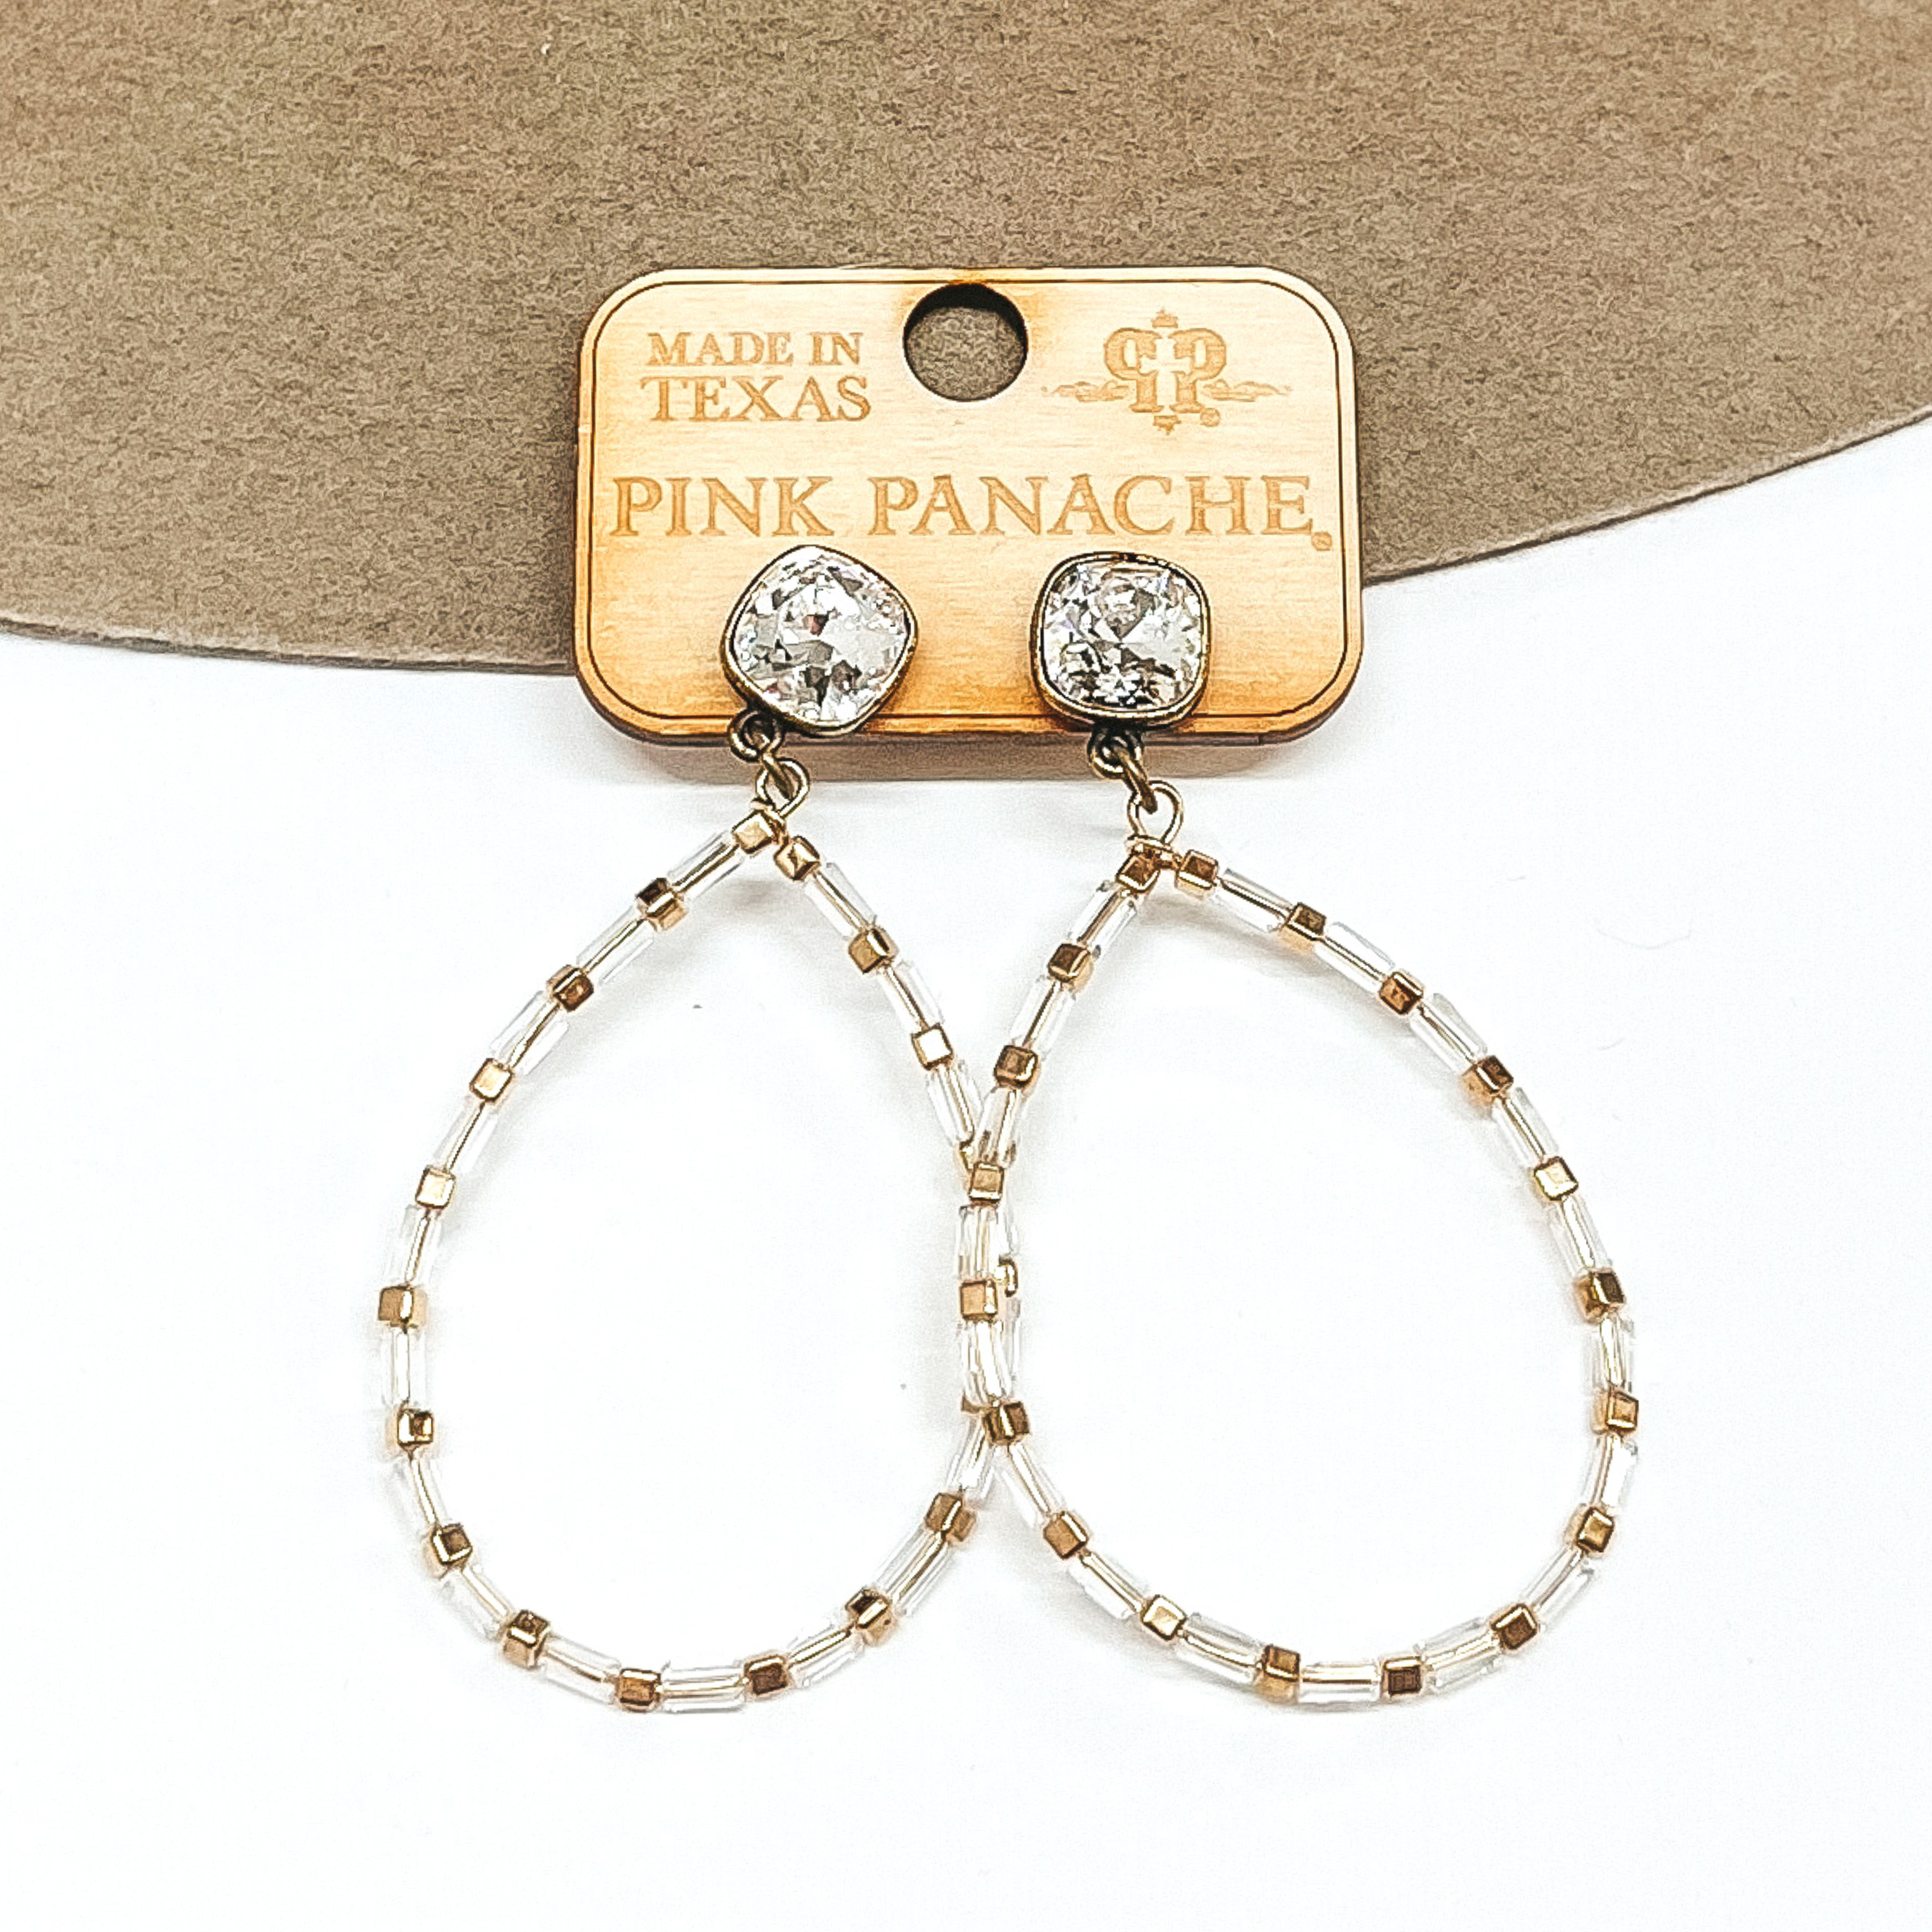 Clear cushion cut crystal earrings in a bronze setting. These earrings include a teardrop pendant that has clear beads with gold bead spacers. These earrings are pictured on a tan and white background.